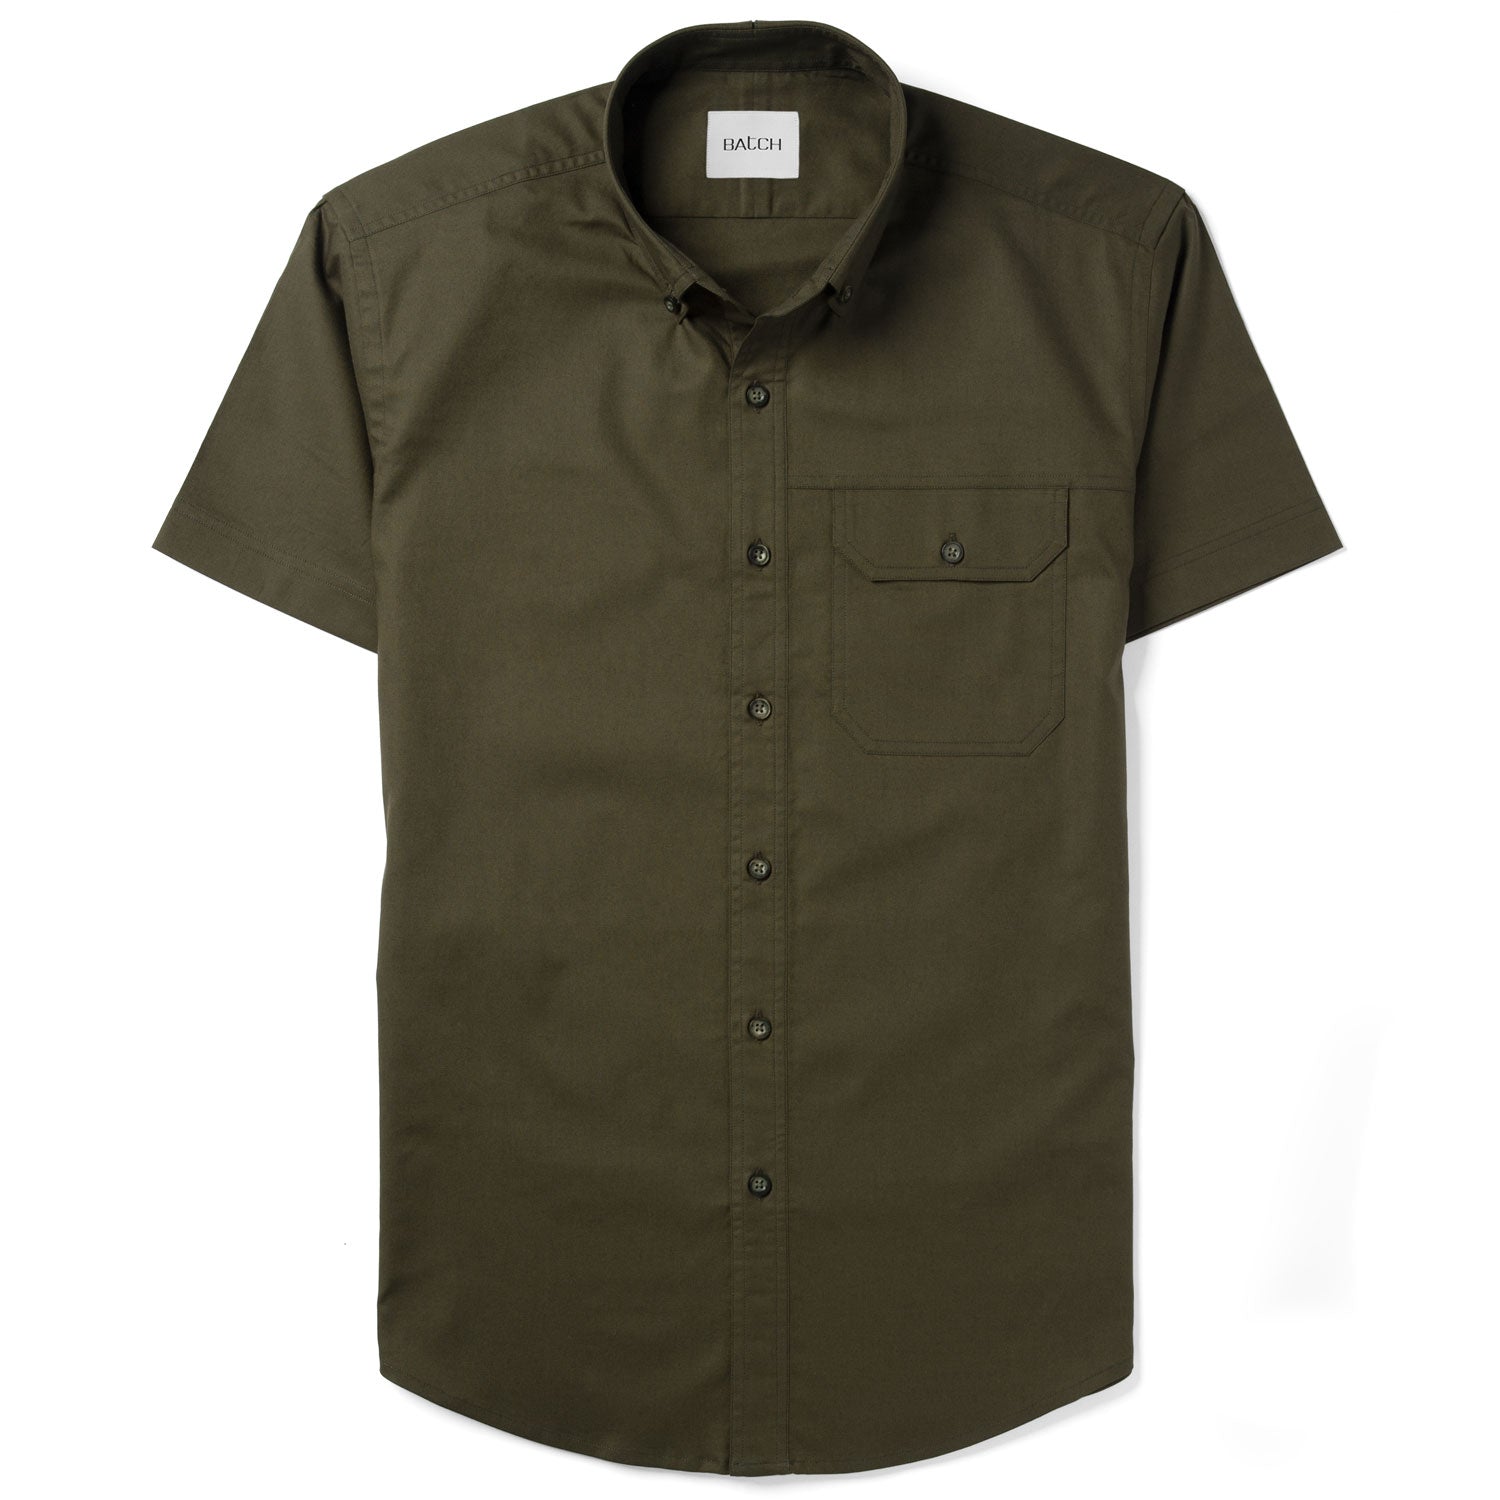 Builder Short Sleeve Casual Shirt – Olive Green Oxford